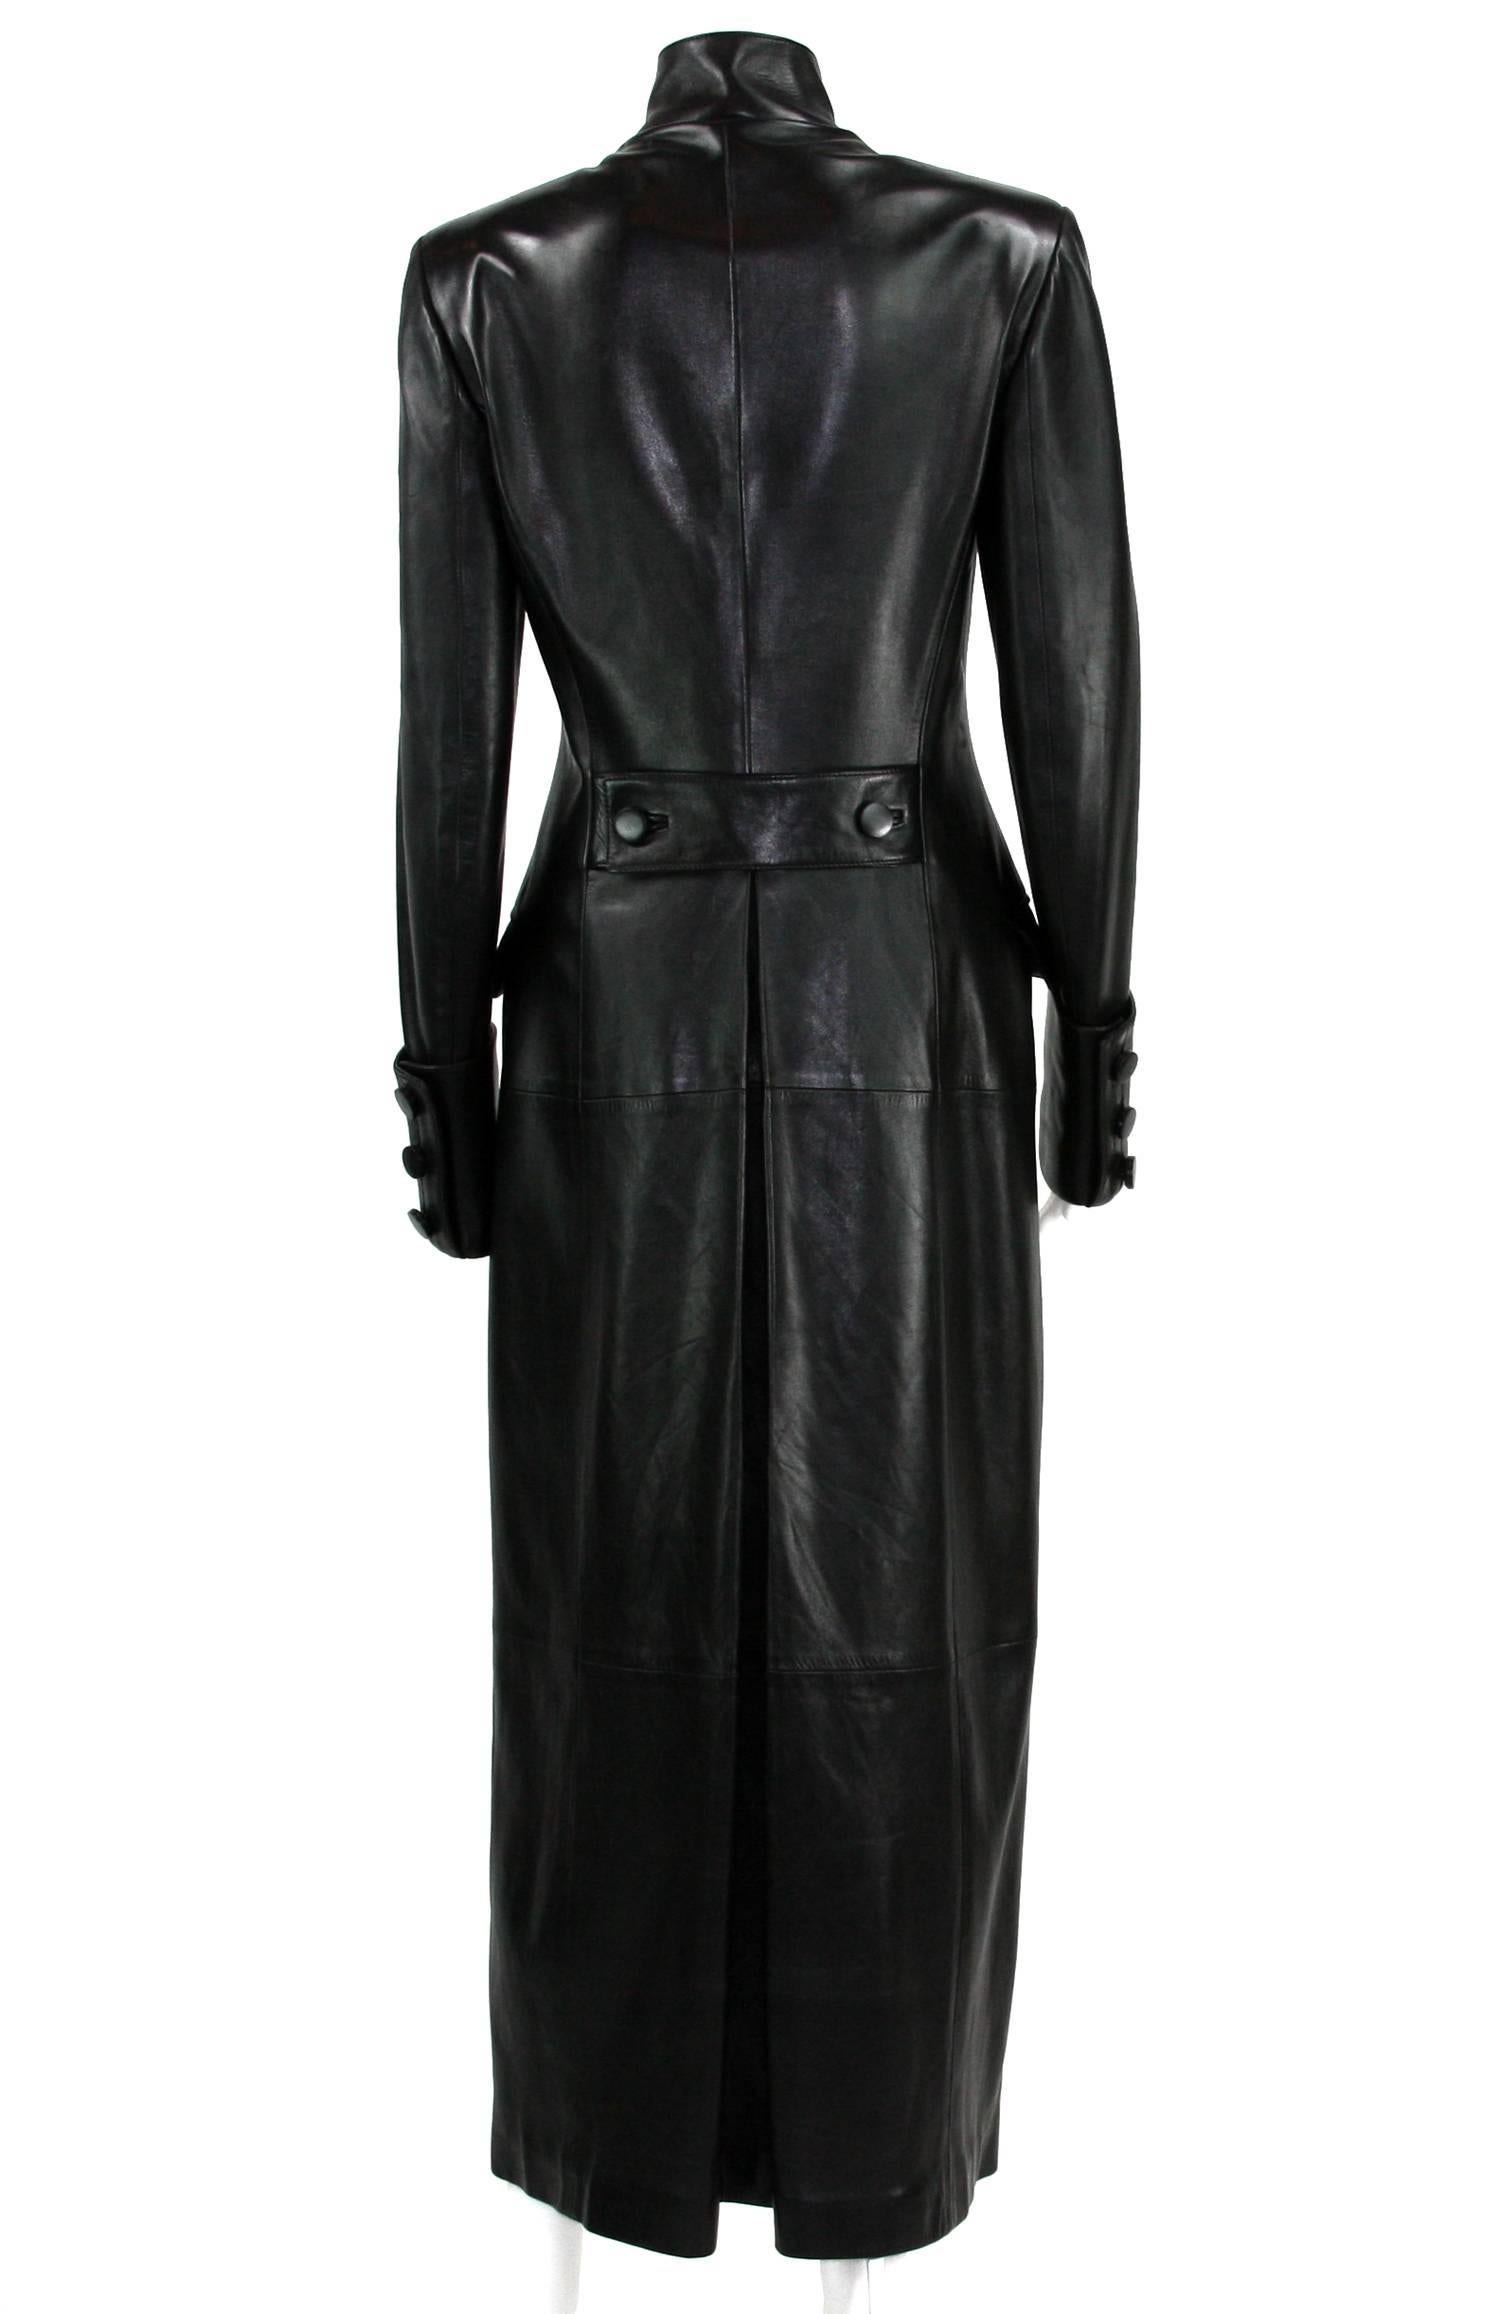 A Fabulous Creation from Tom Ford Era!!!
Tom Ford for Yves Saint Laurent Leather Long Coat
Fr. Size - 40
F/W 2001 Runway Collection
100% Leather, Military Style, Hook and Eye Closure, Two Front Pockets, Fully Lined in Silk.
Made in